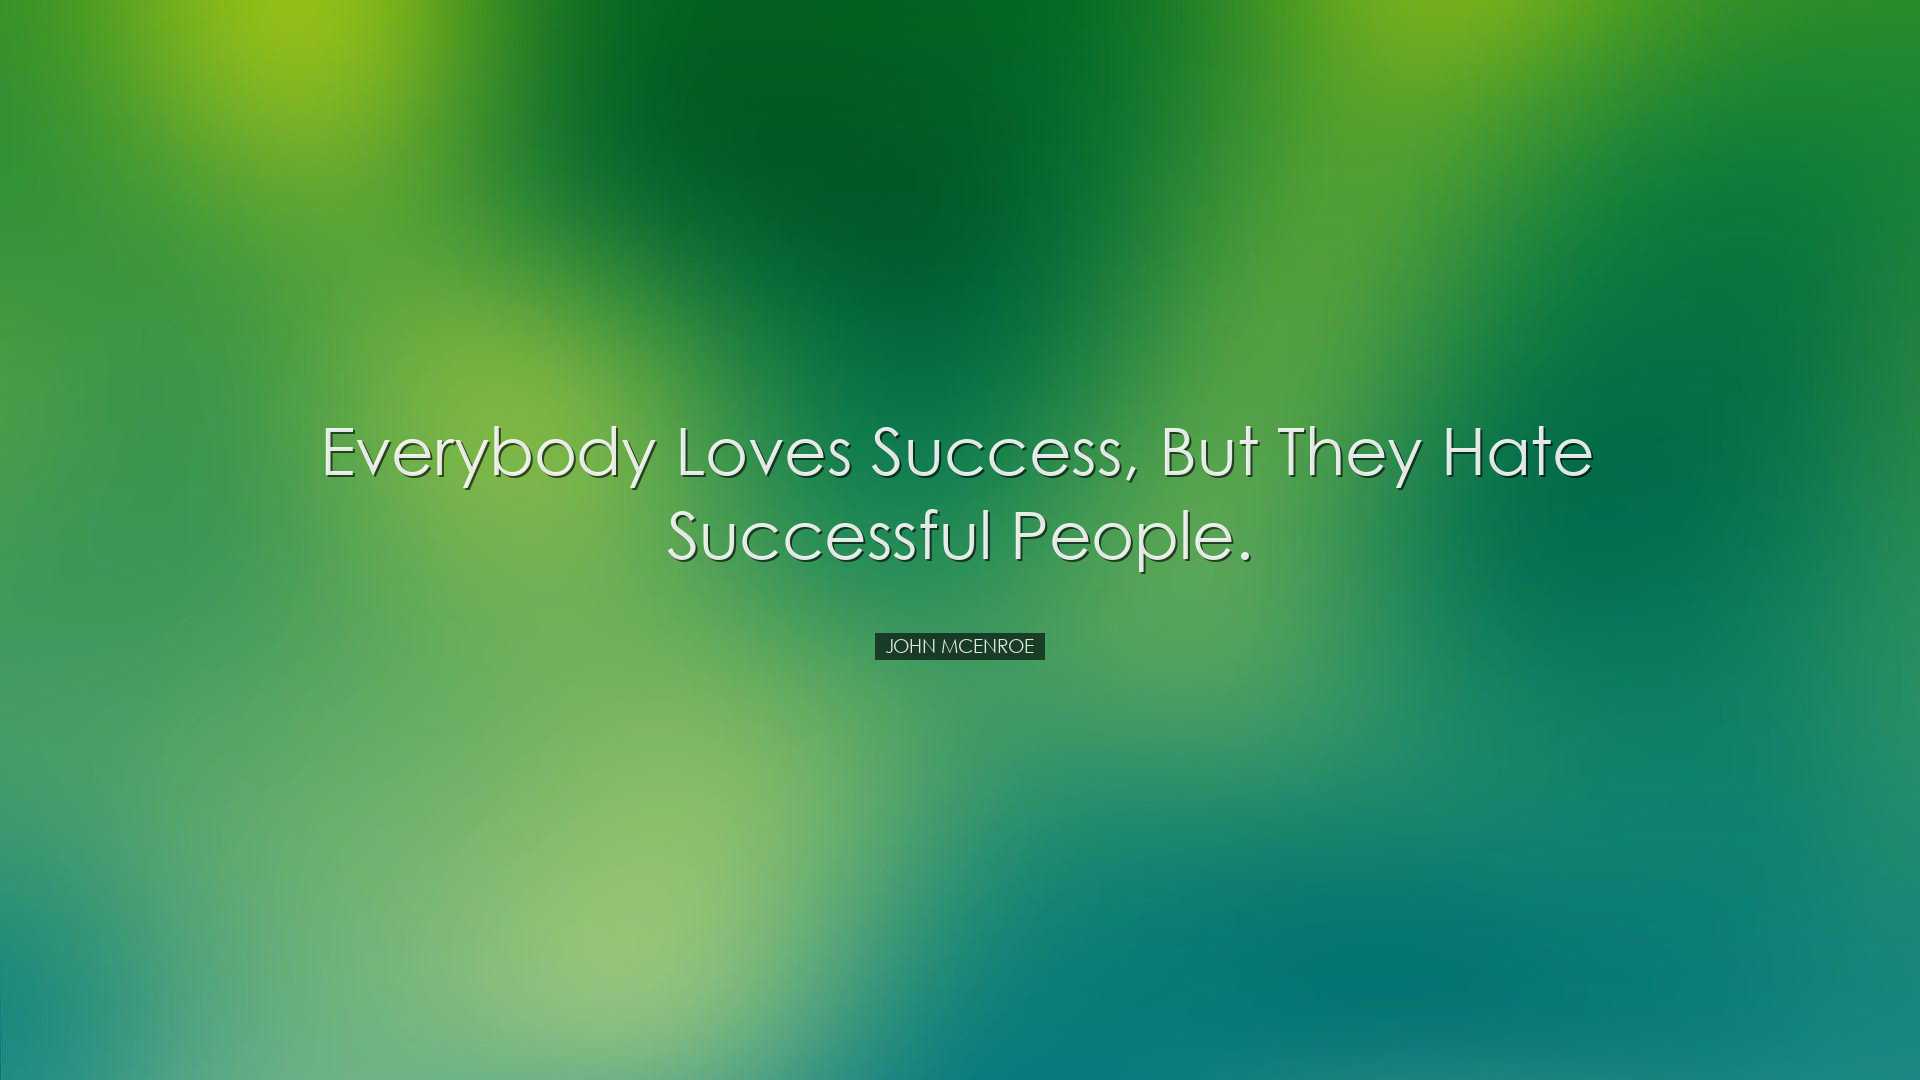 Everybody loves success, but they hate successful people. - John M